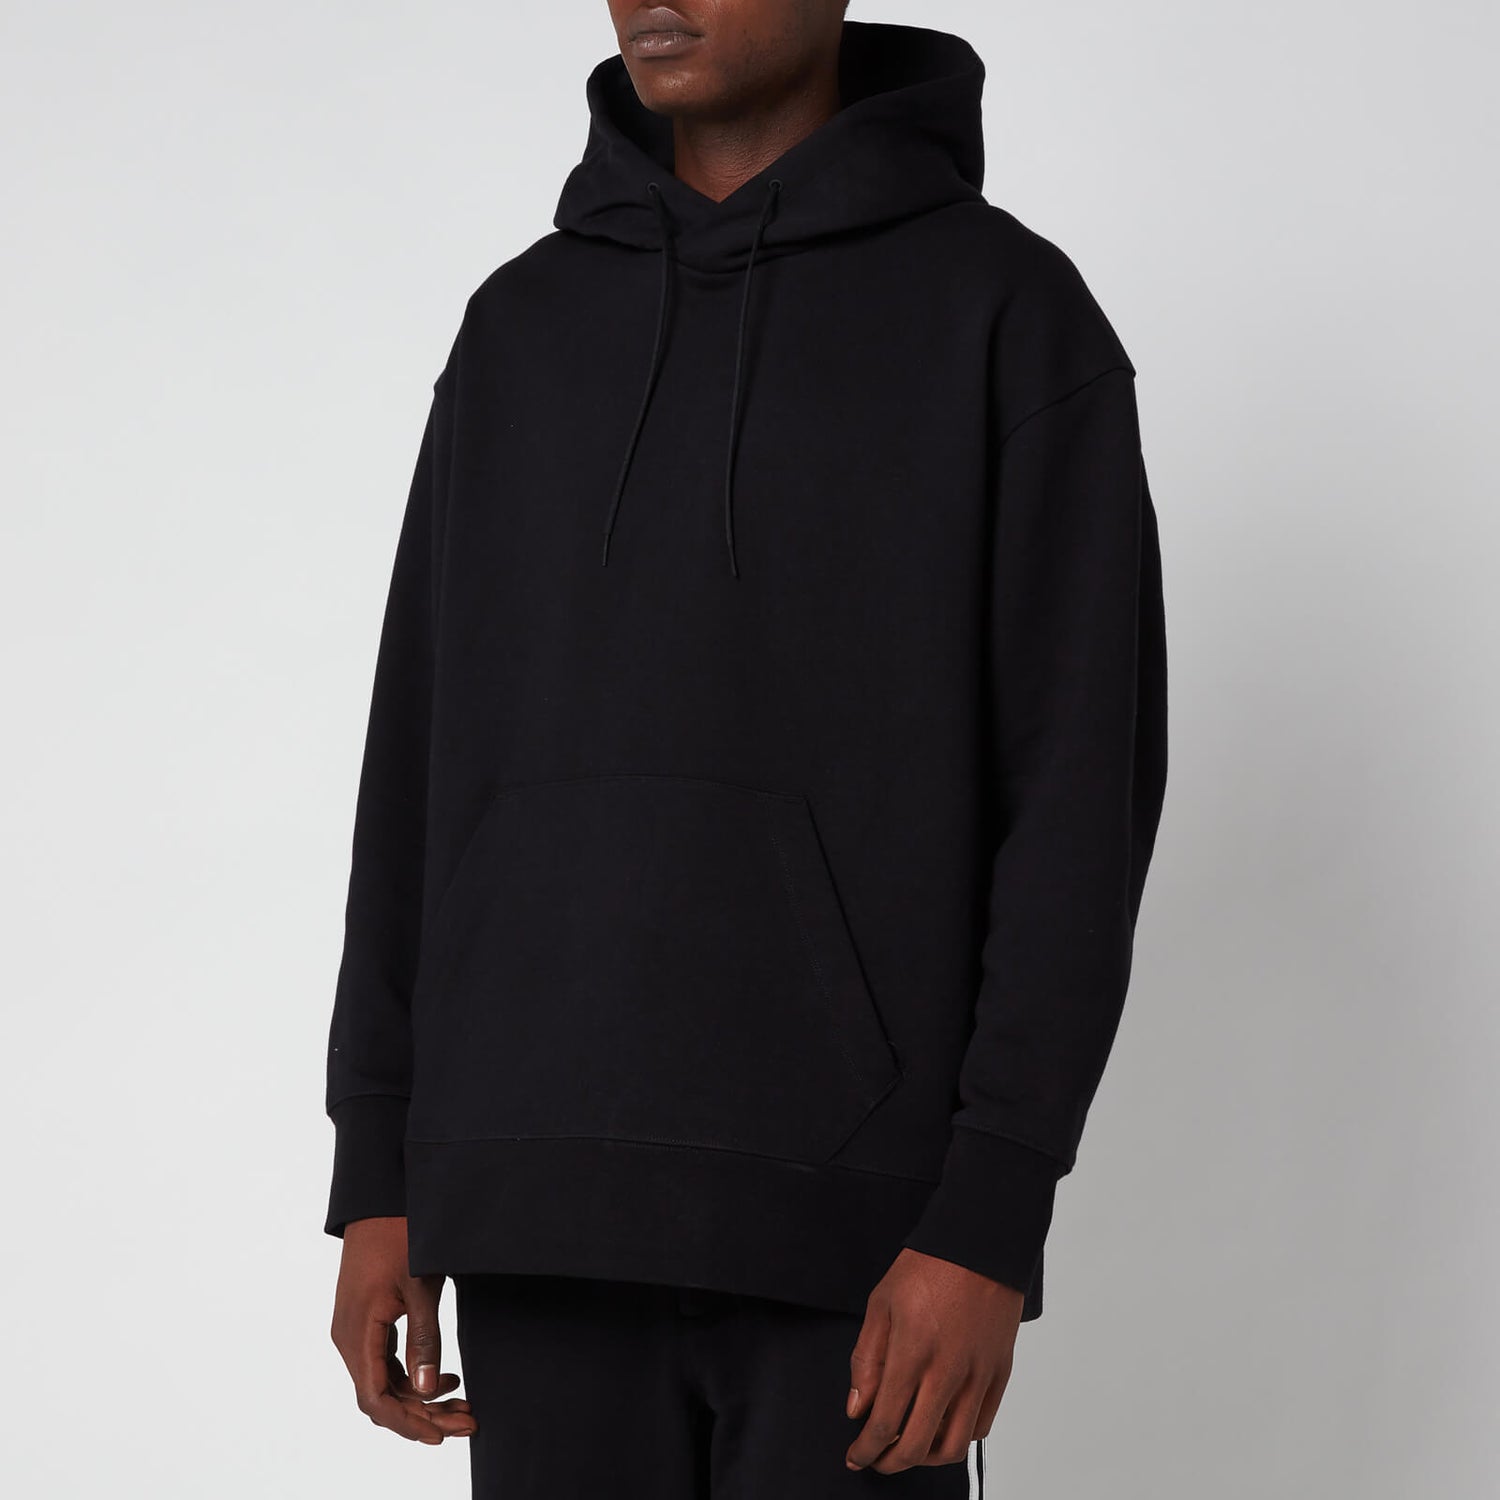 Y-3 Men's 3-Stripes Terry Hoodie - Black - Free UK Delivery Available